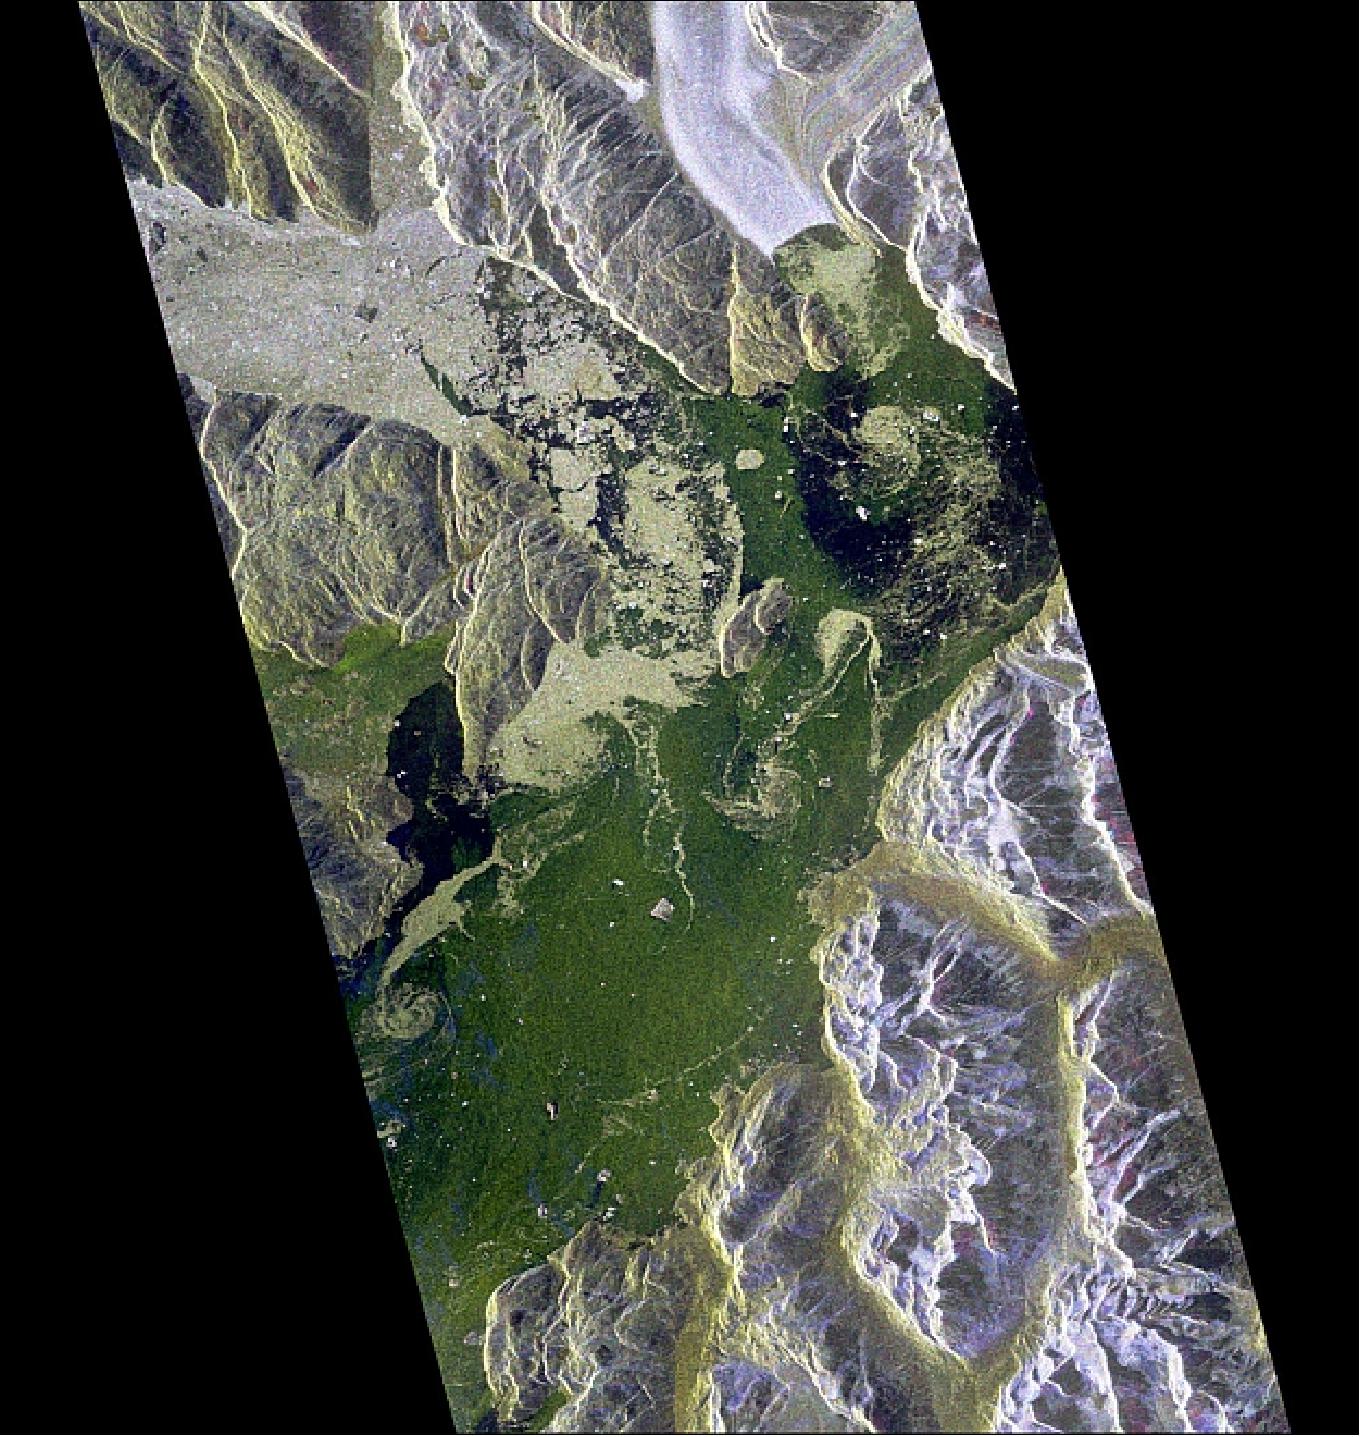 Figure 31: The first Quad Pol image of RADARSAT-2 on Dec. 18, 2007 showing the region of the Sermilik Fjord in Greenland (image credit: MDA)